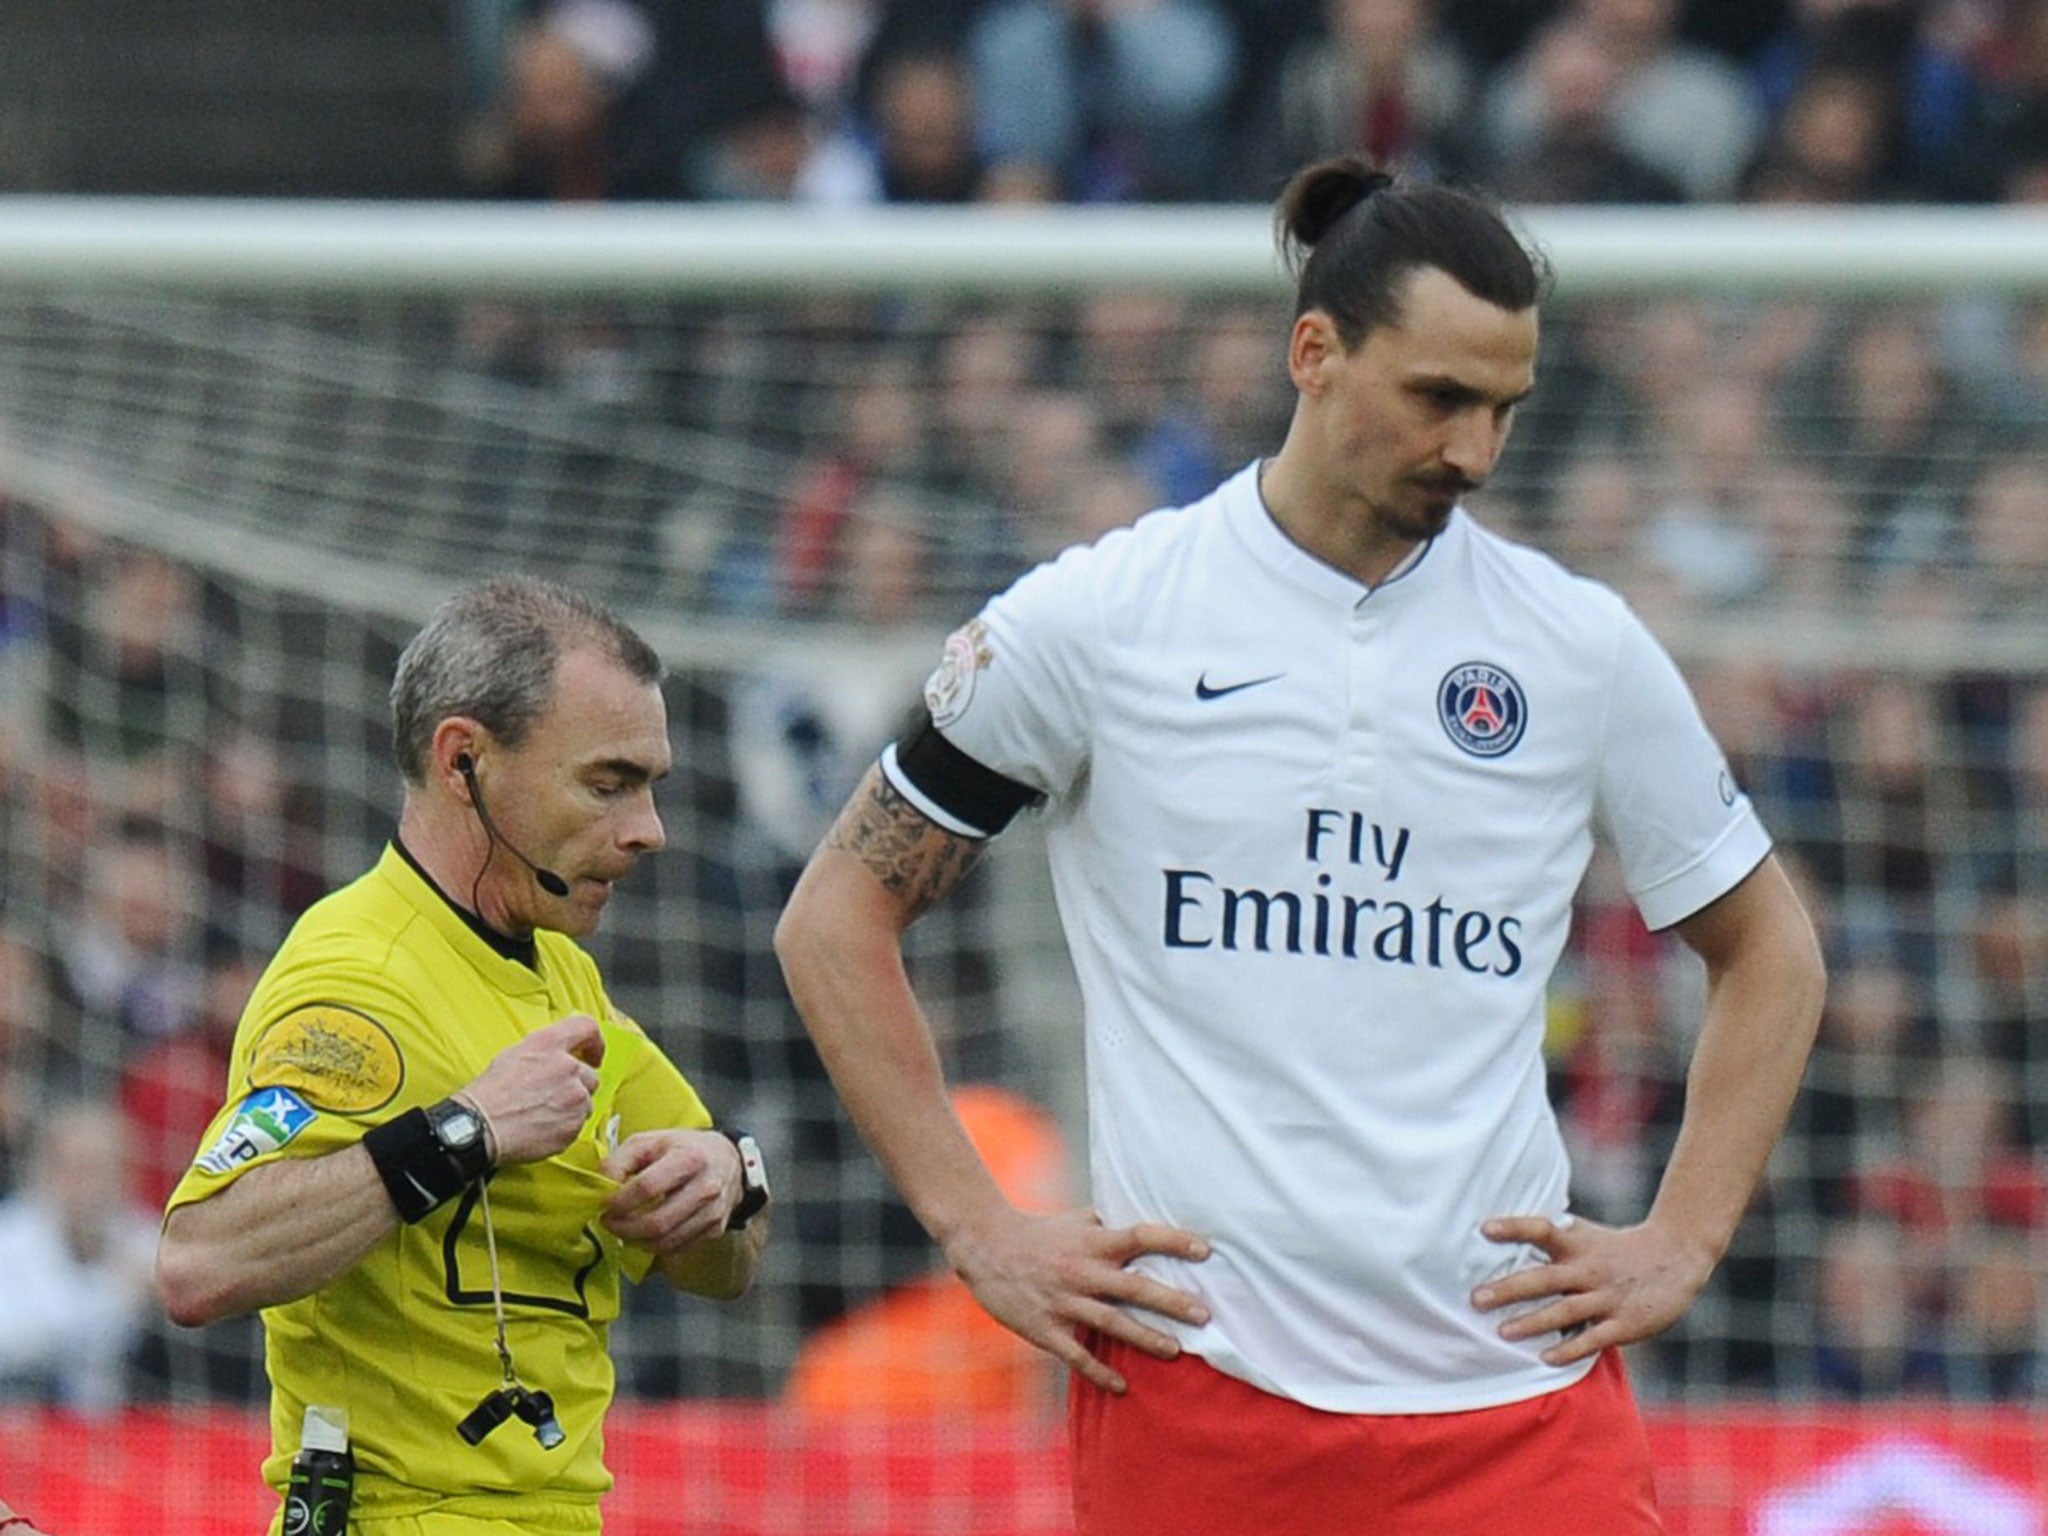 Zlatan Ibrahimovic (right) next to referee Lionel Jaffredo during PSG's loss at Bordeaux on Sunday